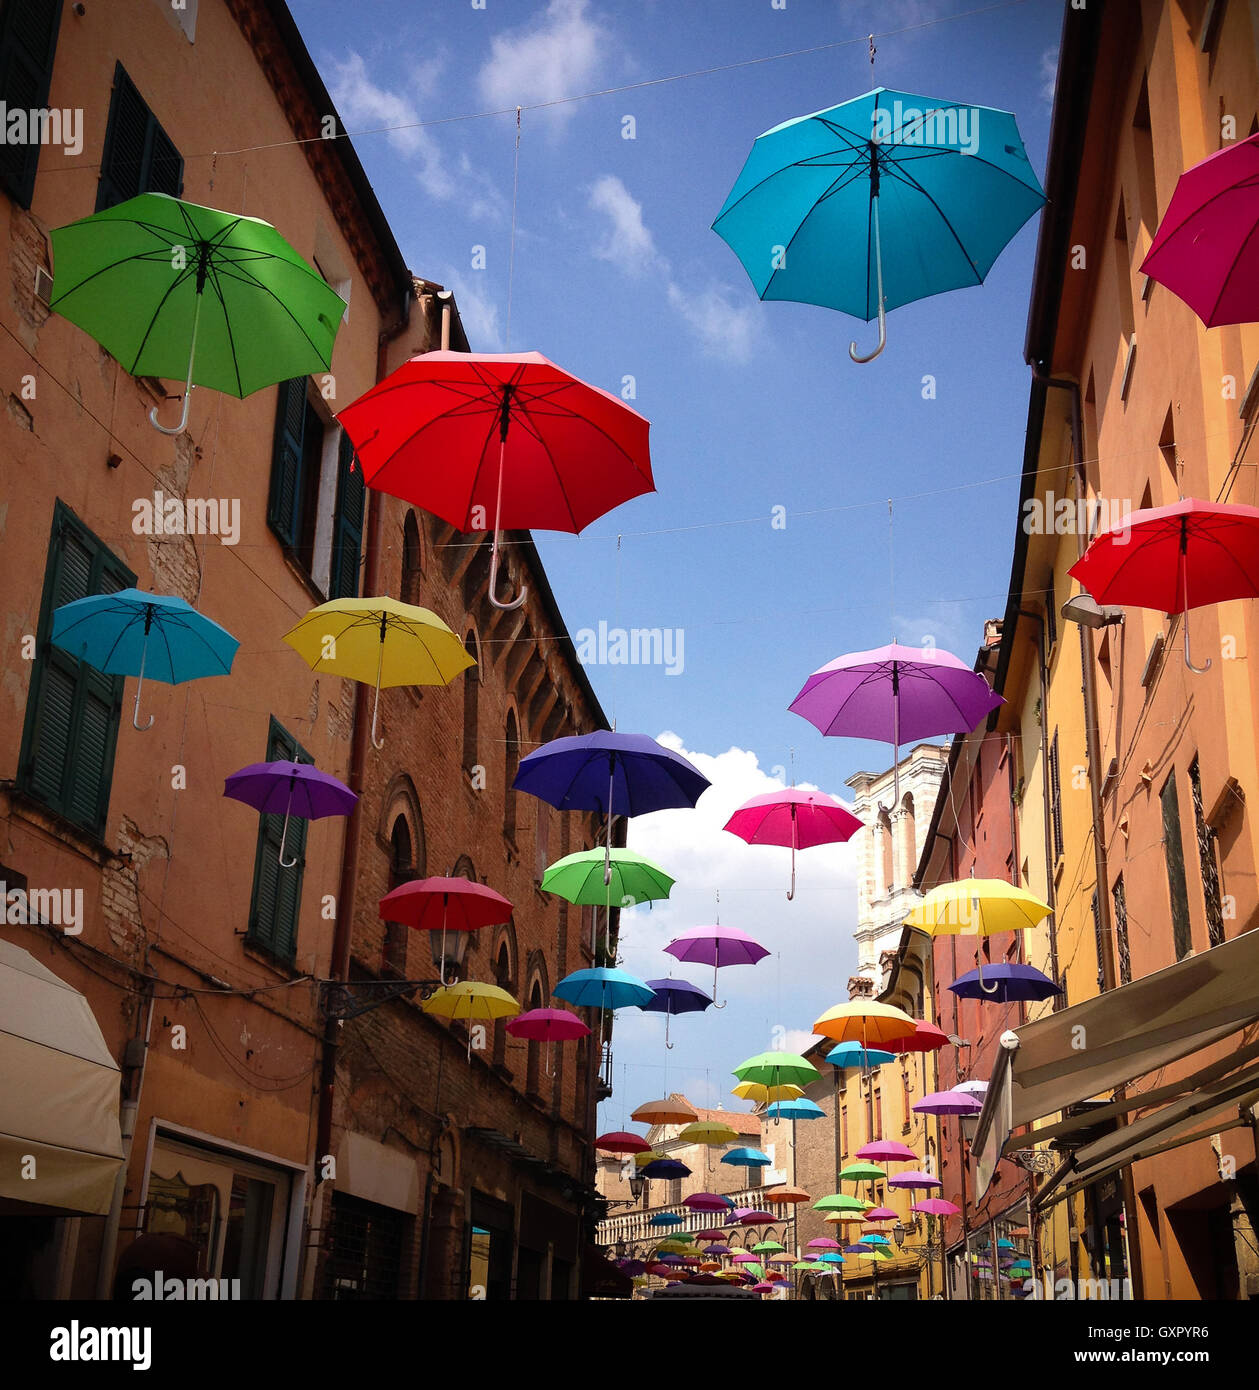 Colorful umbrellas floating in the air Stock Photo